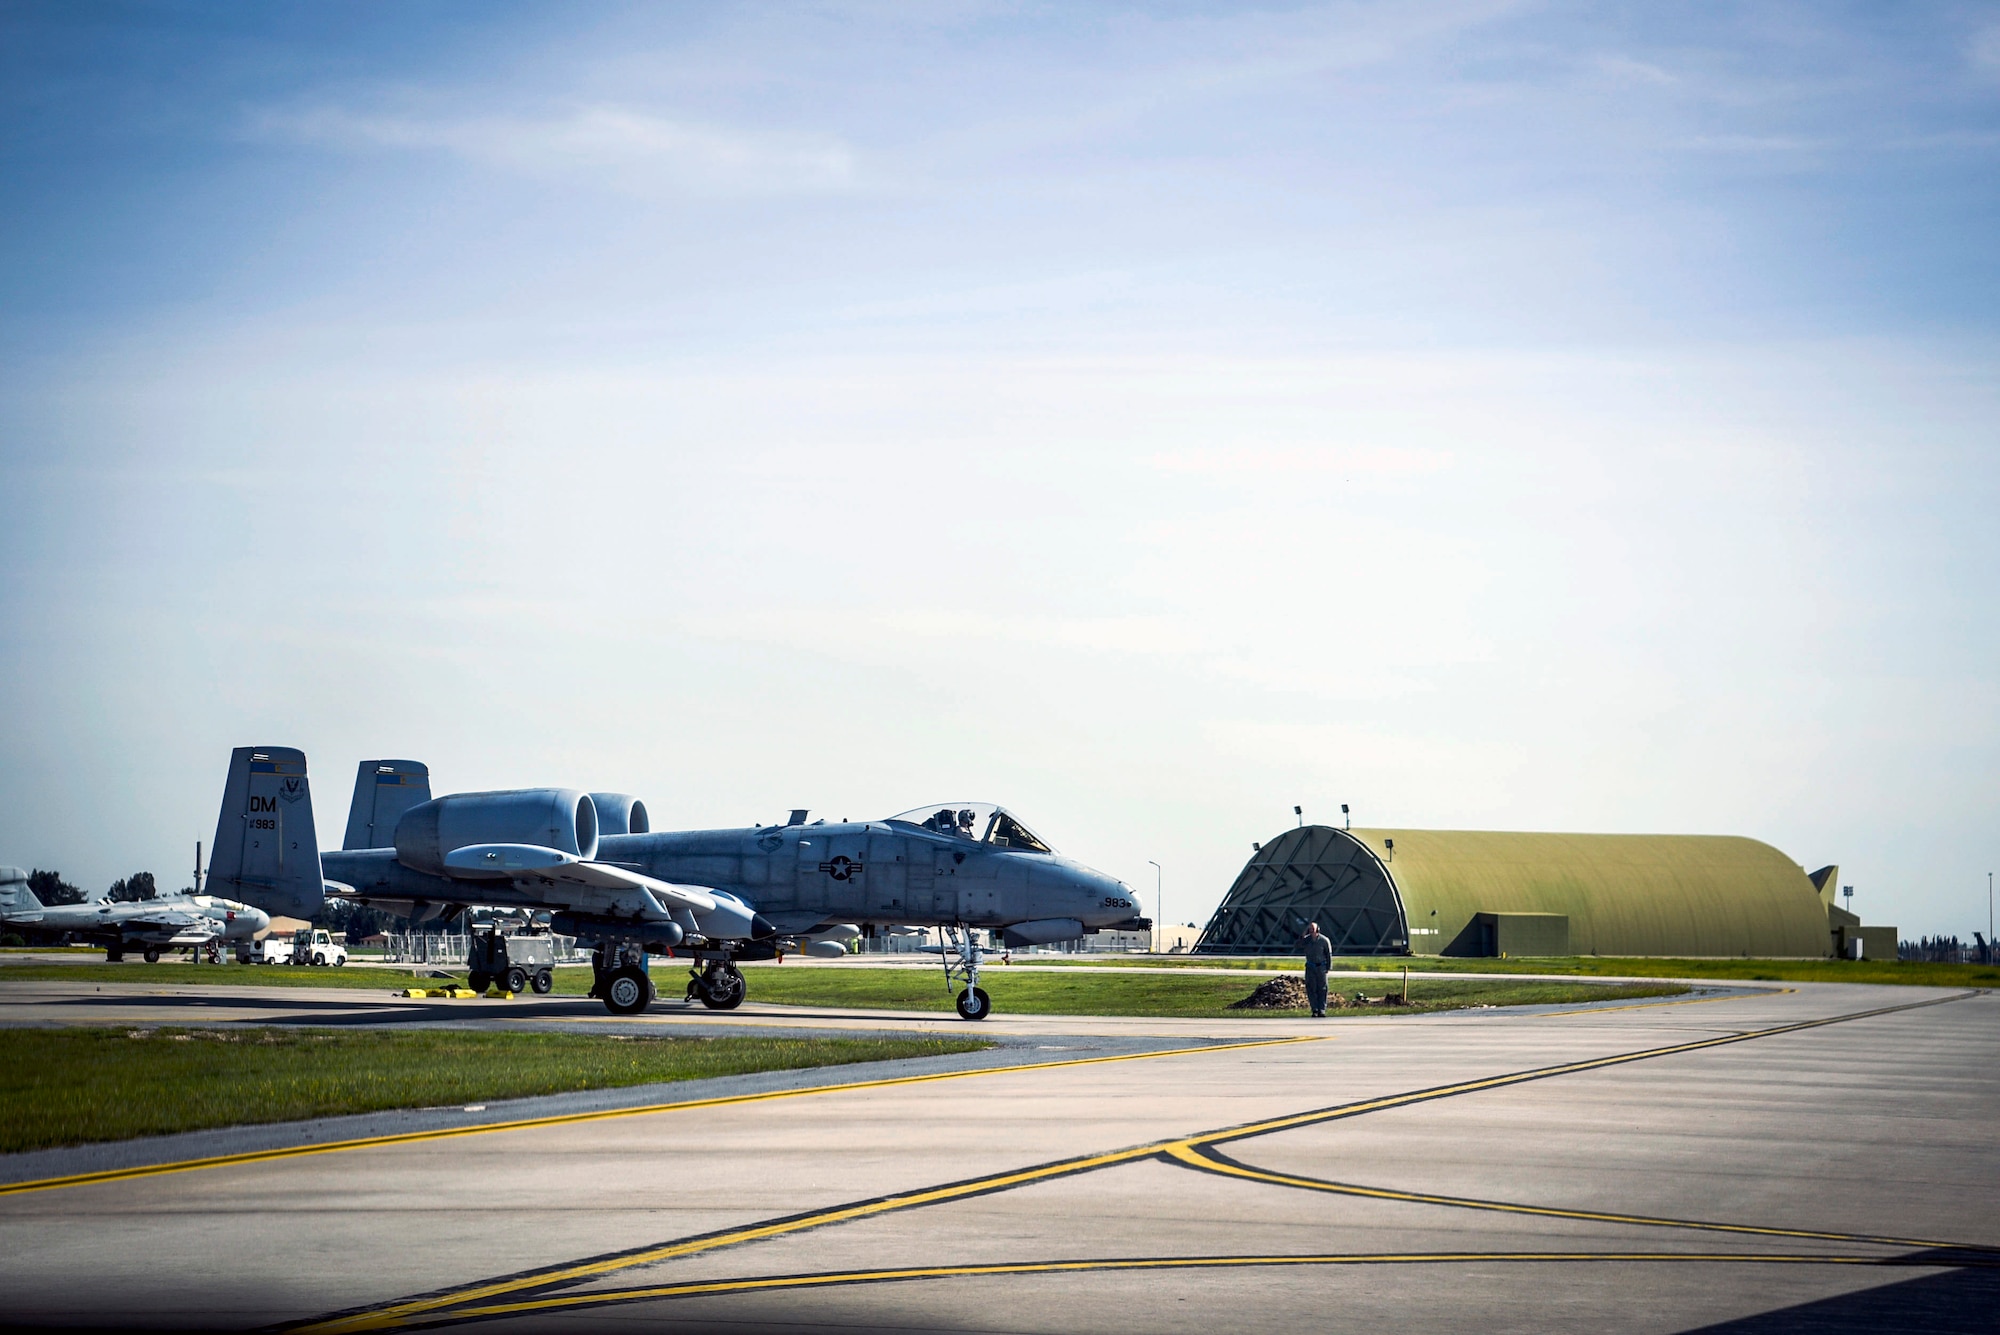 A crew chief from the 354th Expeditionary Aircraft Maintenance Unit launches an A-10C Thunderbolt II combat sortie April 11, 2017, at Incirlik Air Base, Turkey. The 354th Expeditionary Fighter Squadron relies on the 354th EAMU for aircraft maintenance and the munitions needed to execute the air tasking order in the region. (U.S. Air Force photo by Tech Sgt. Eboni Reams)